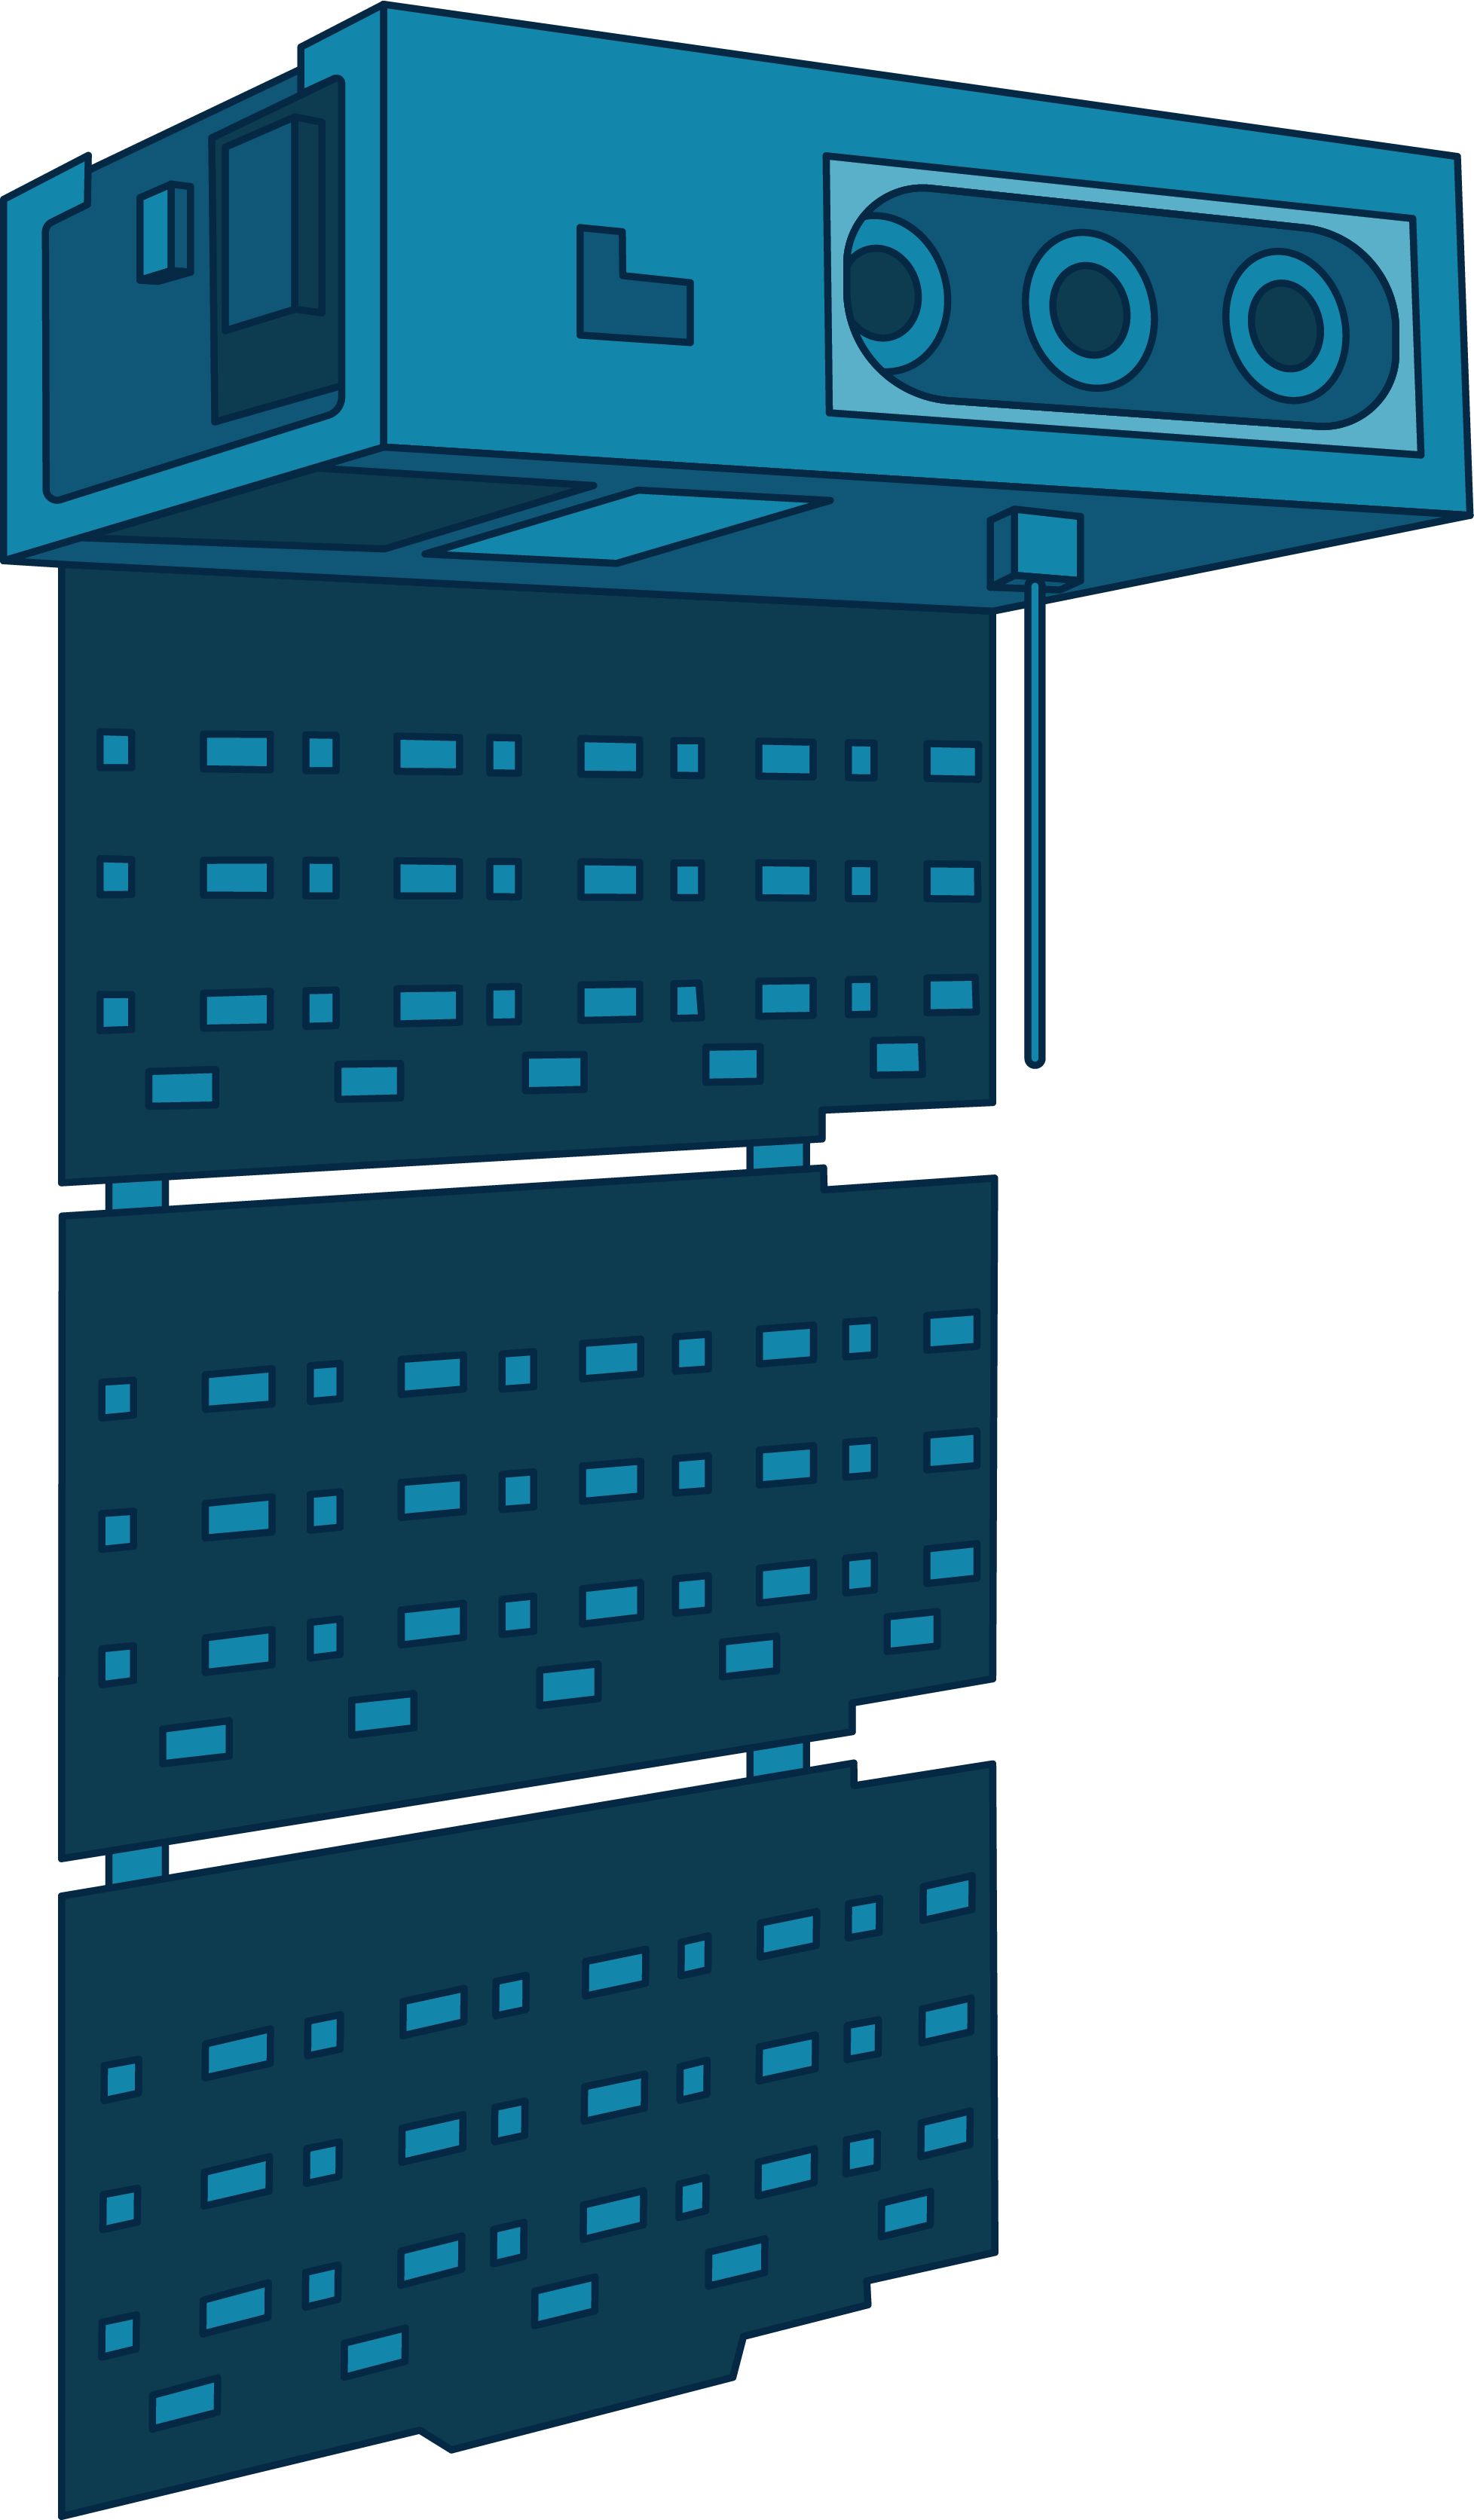 This HaloSat illustration shows the space telescope in shades of blue. The body of the spacecraft is a rectangle with three circles along the long, narrow side. One solar panel extends from the spacecraft body.